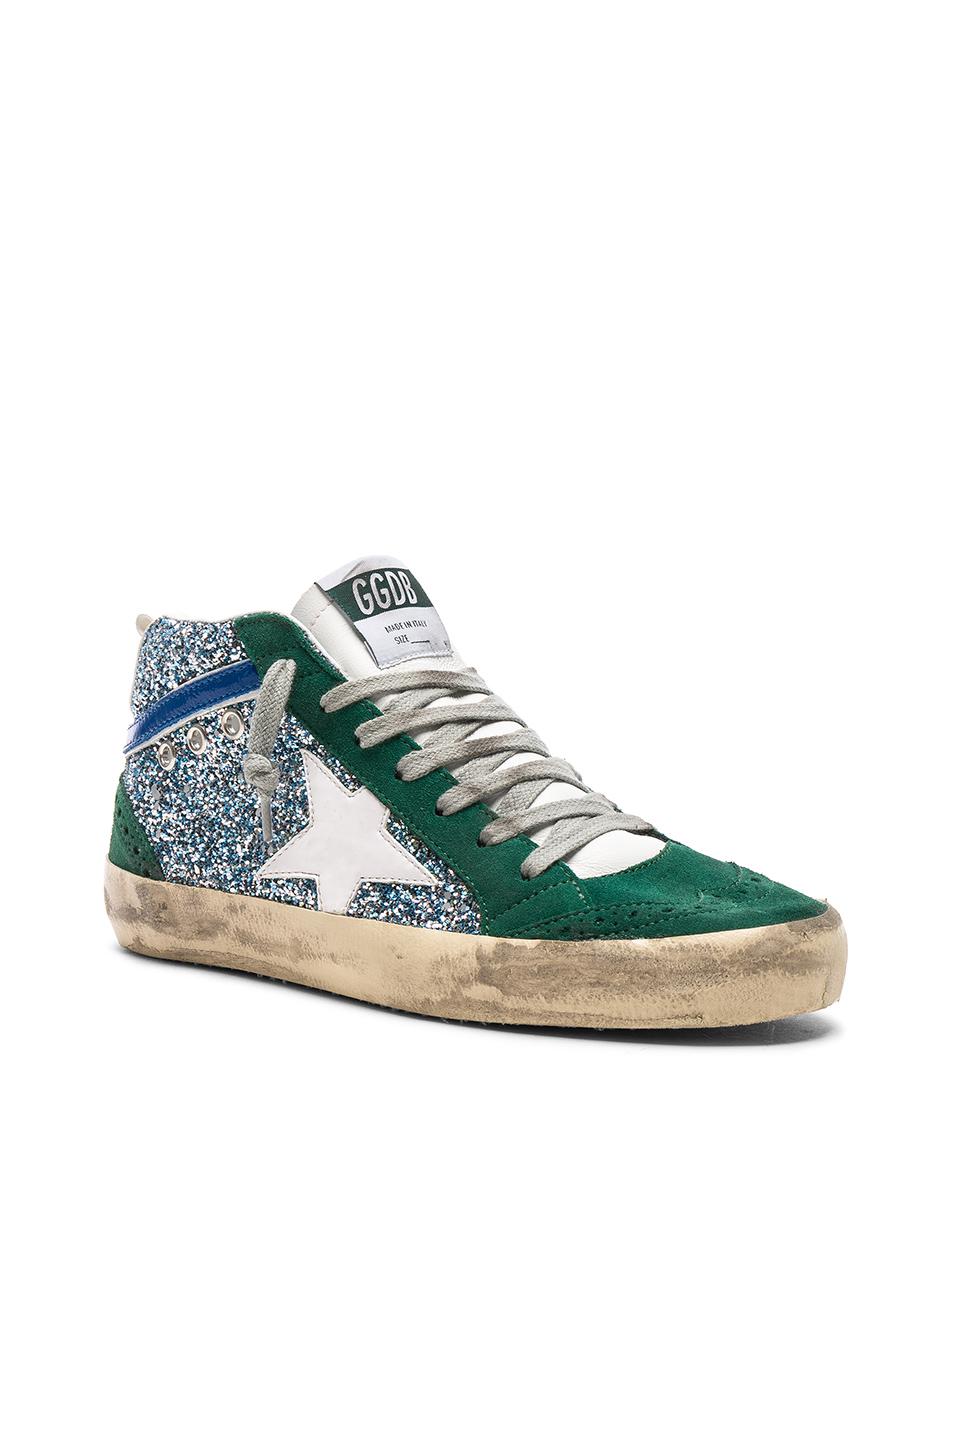 Golden Goose Deluxe Brand Leather Glittered Mid Star Sneakers in Green ...